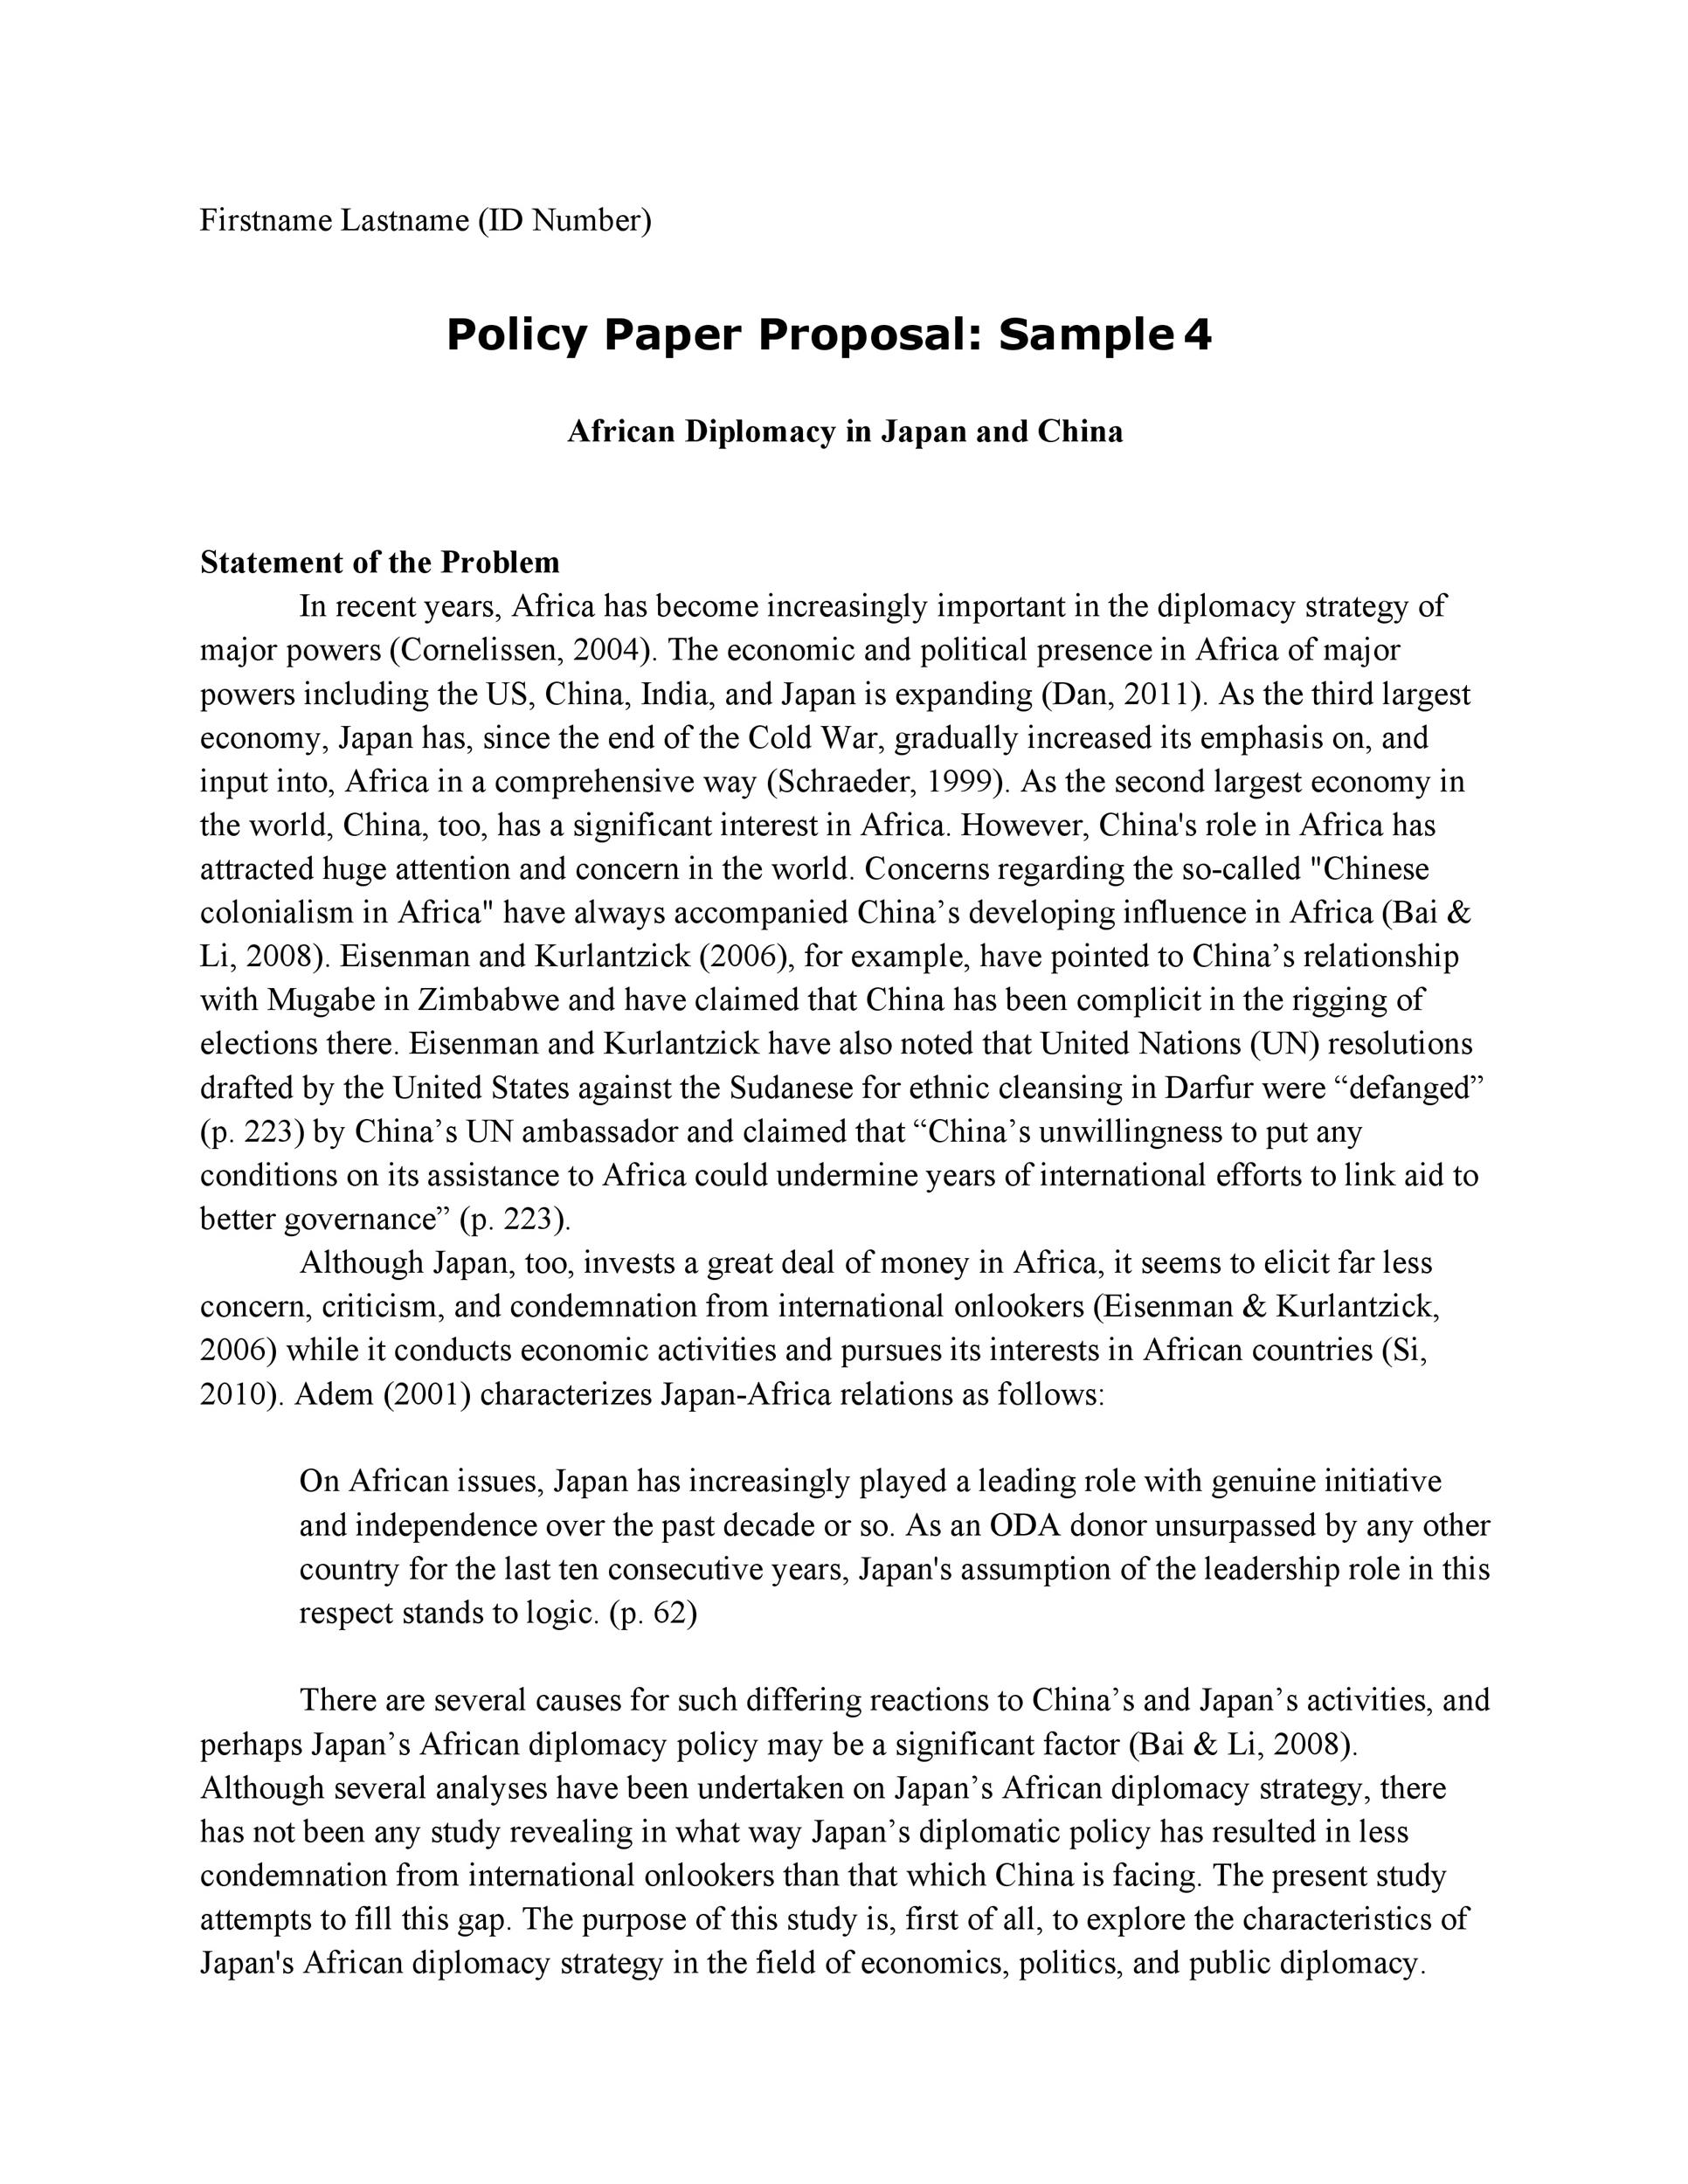 example of business proposal essay